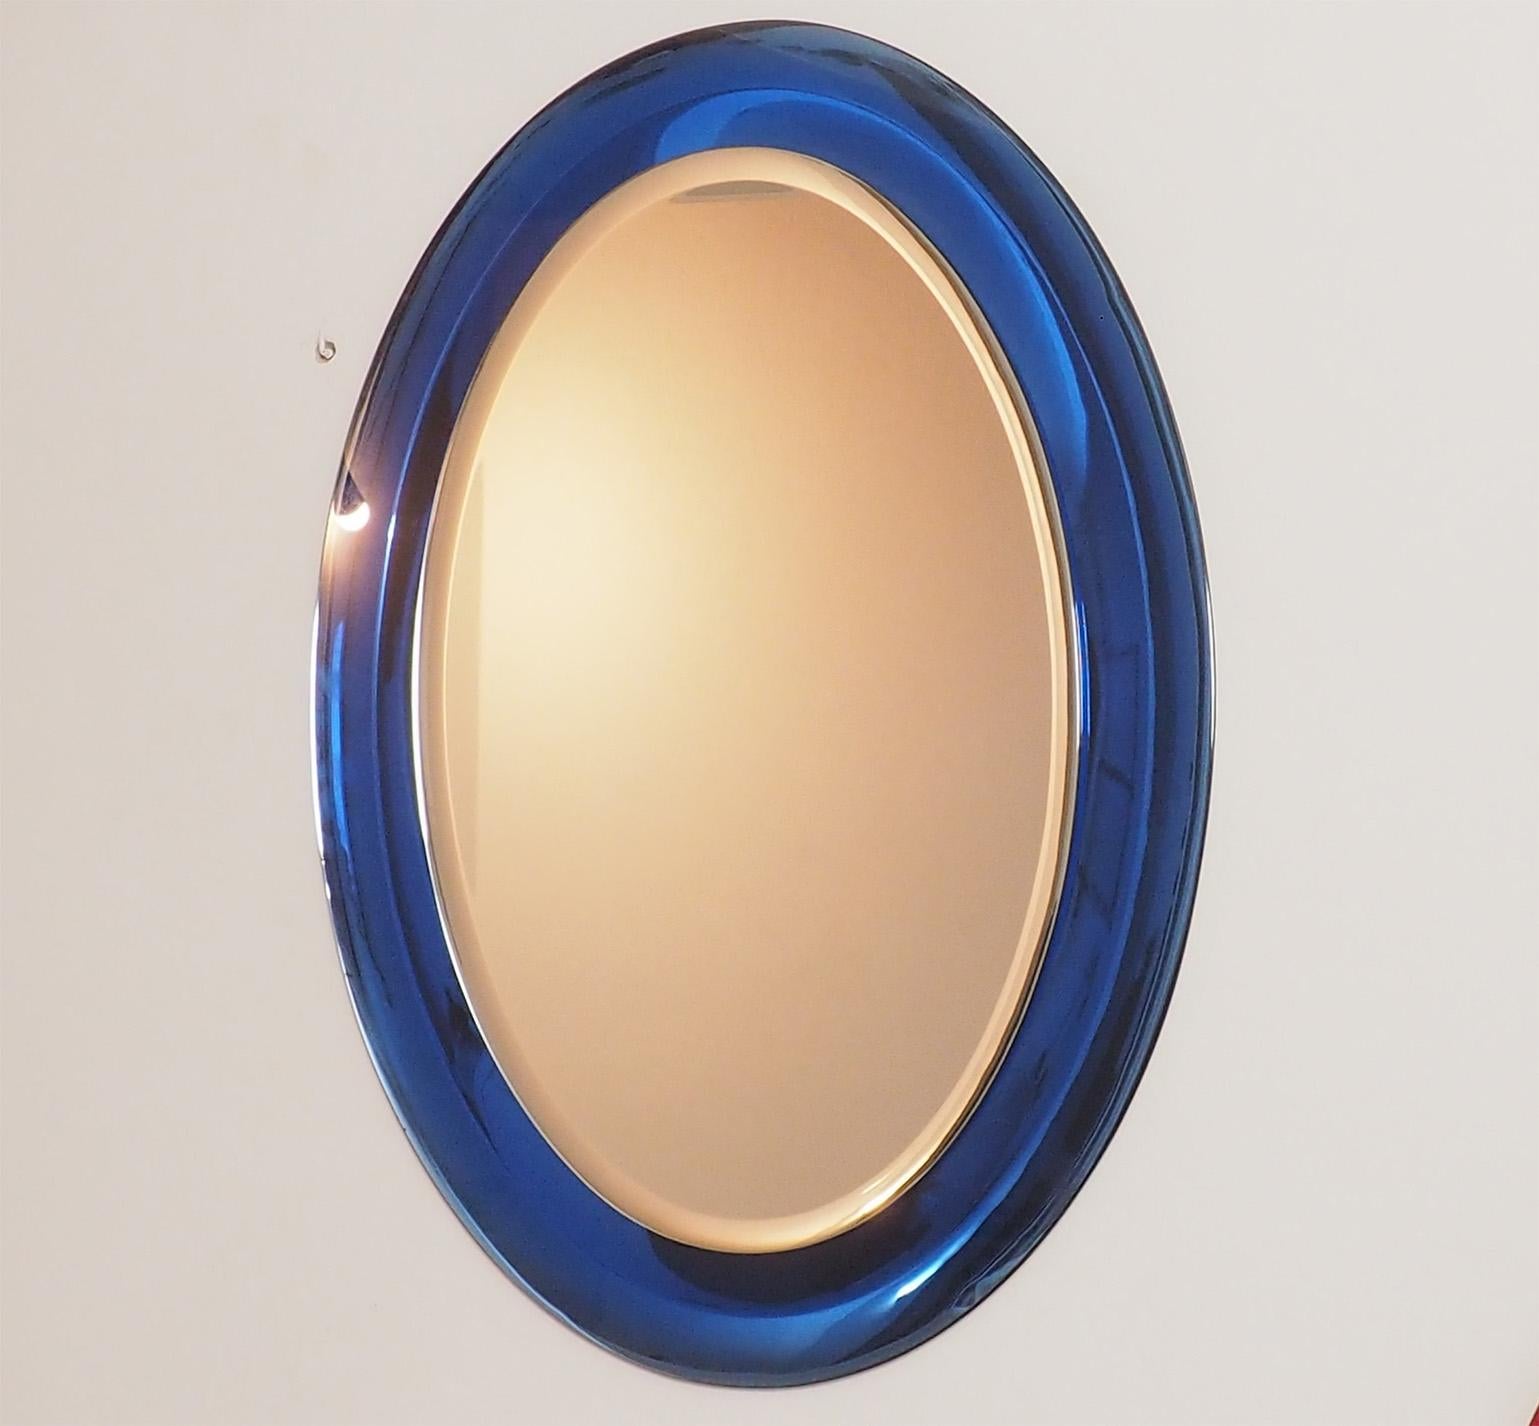 Fontana Arte large blue oval mirror, with a partial visible label on the back
Thanks to the back beveled mirrored blue frame it creates a beautiful reflex on the front.
The beautiful tone of blue together with the large proportion of the oval